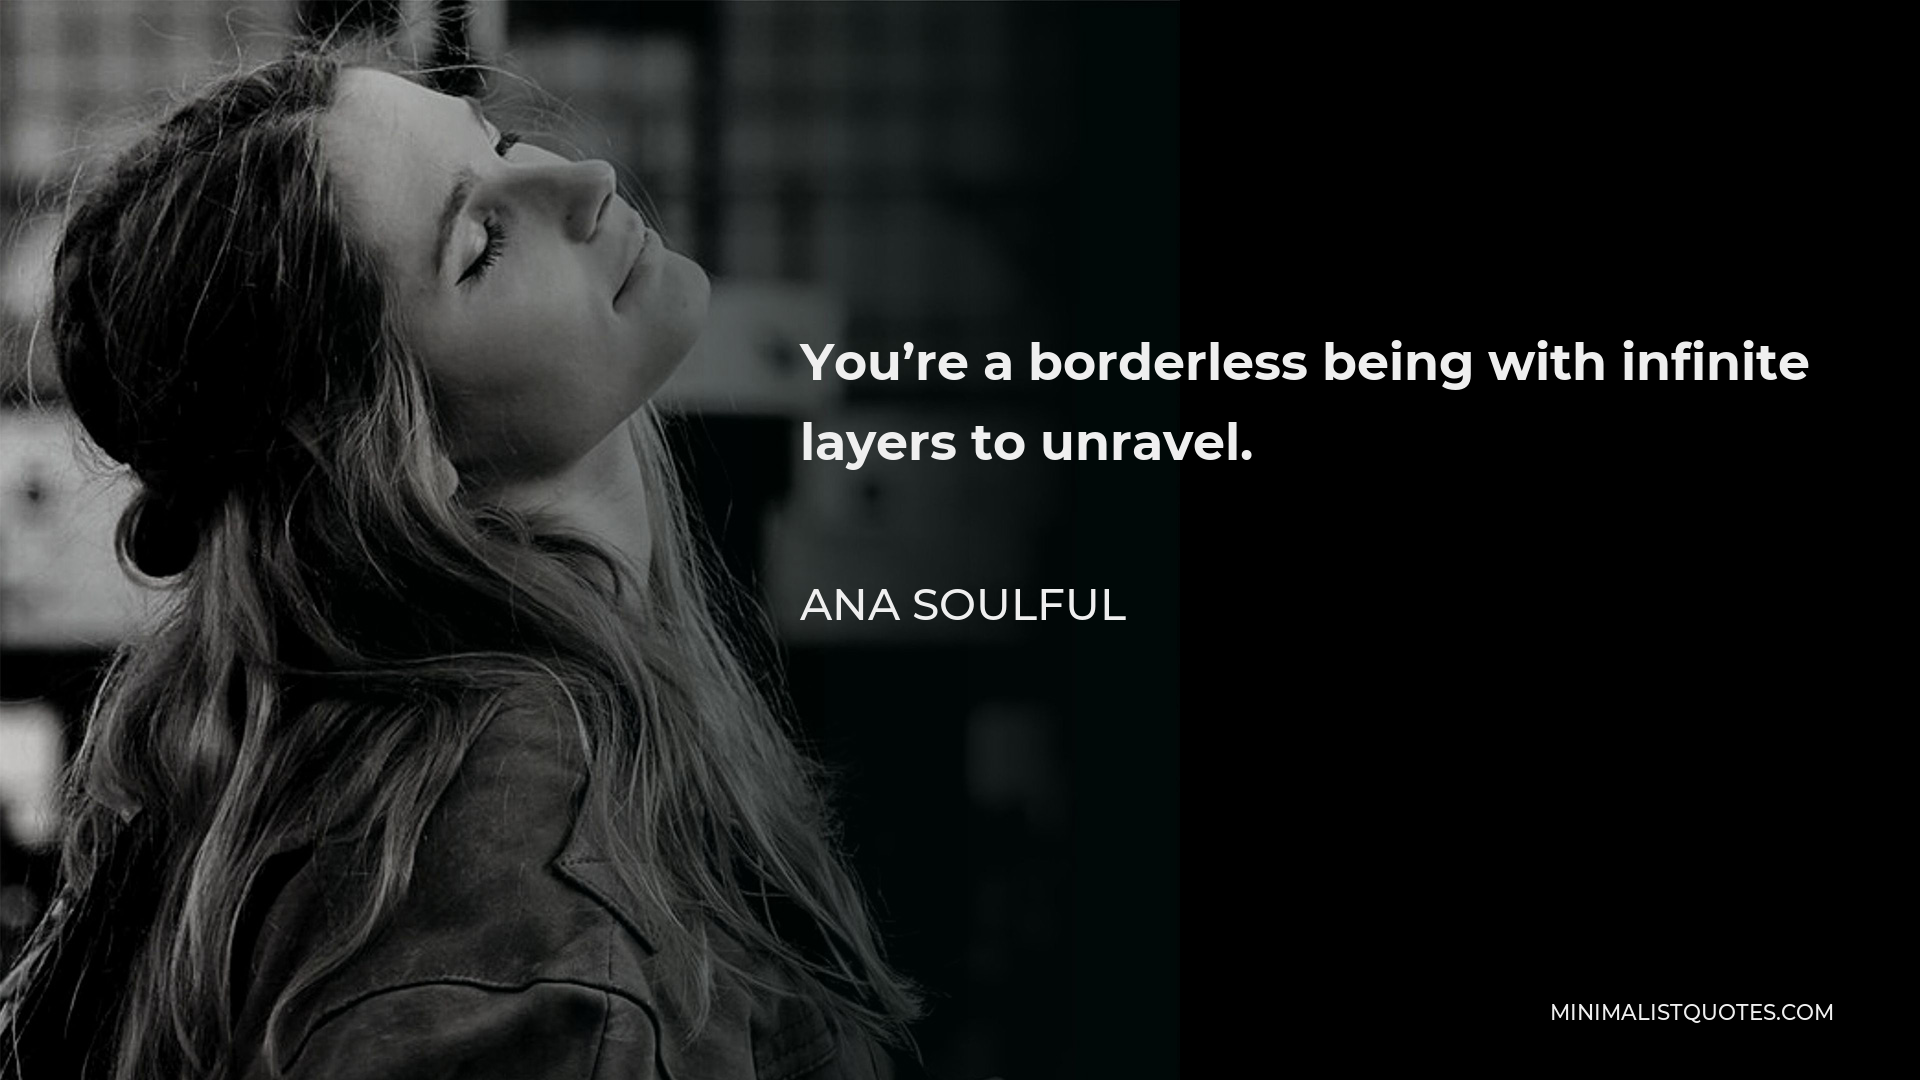 Ana Soulful Quote - You’re a borderless being with infinite layers to unravel.